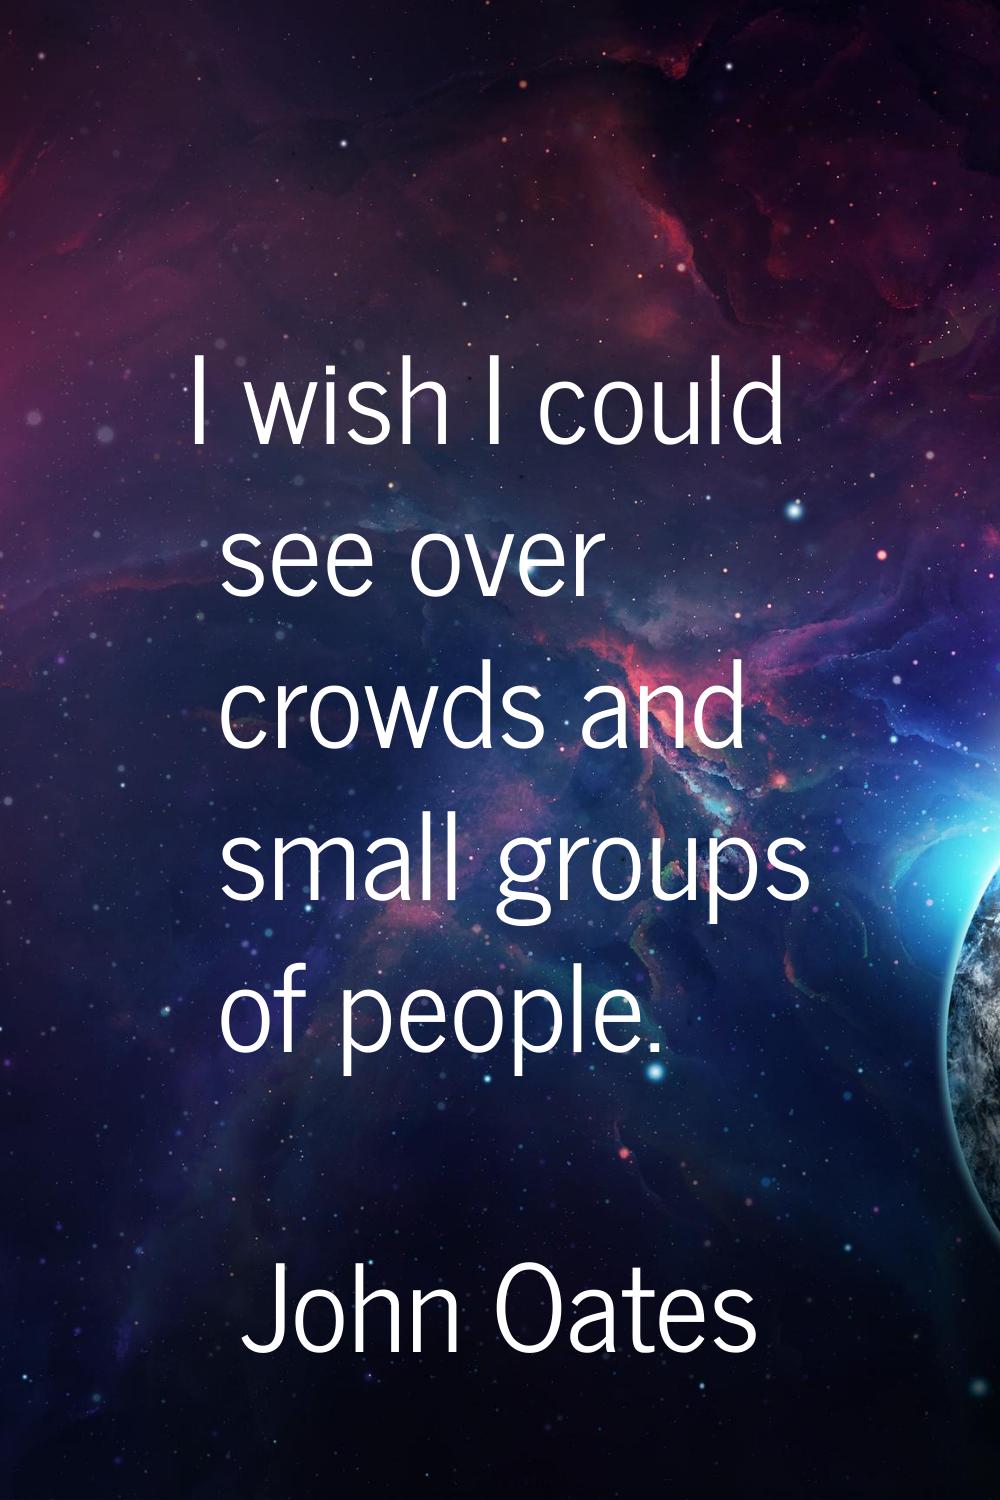 I wish I could see over crowds and small groups of people.